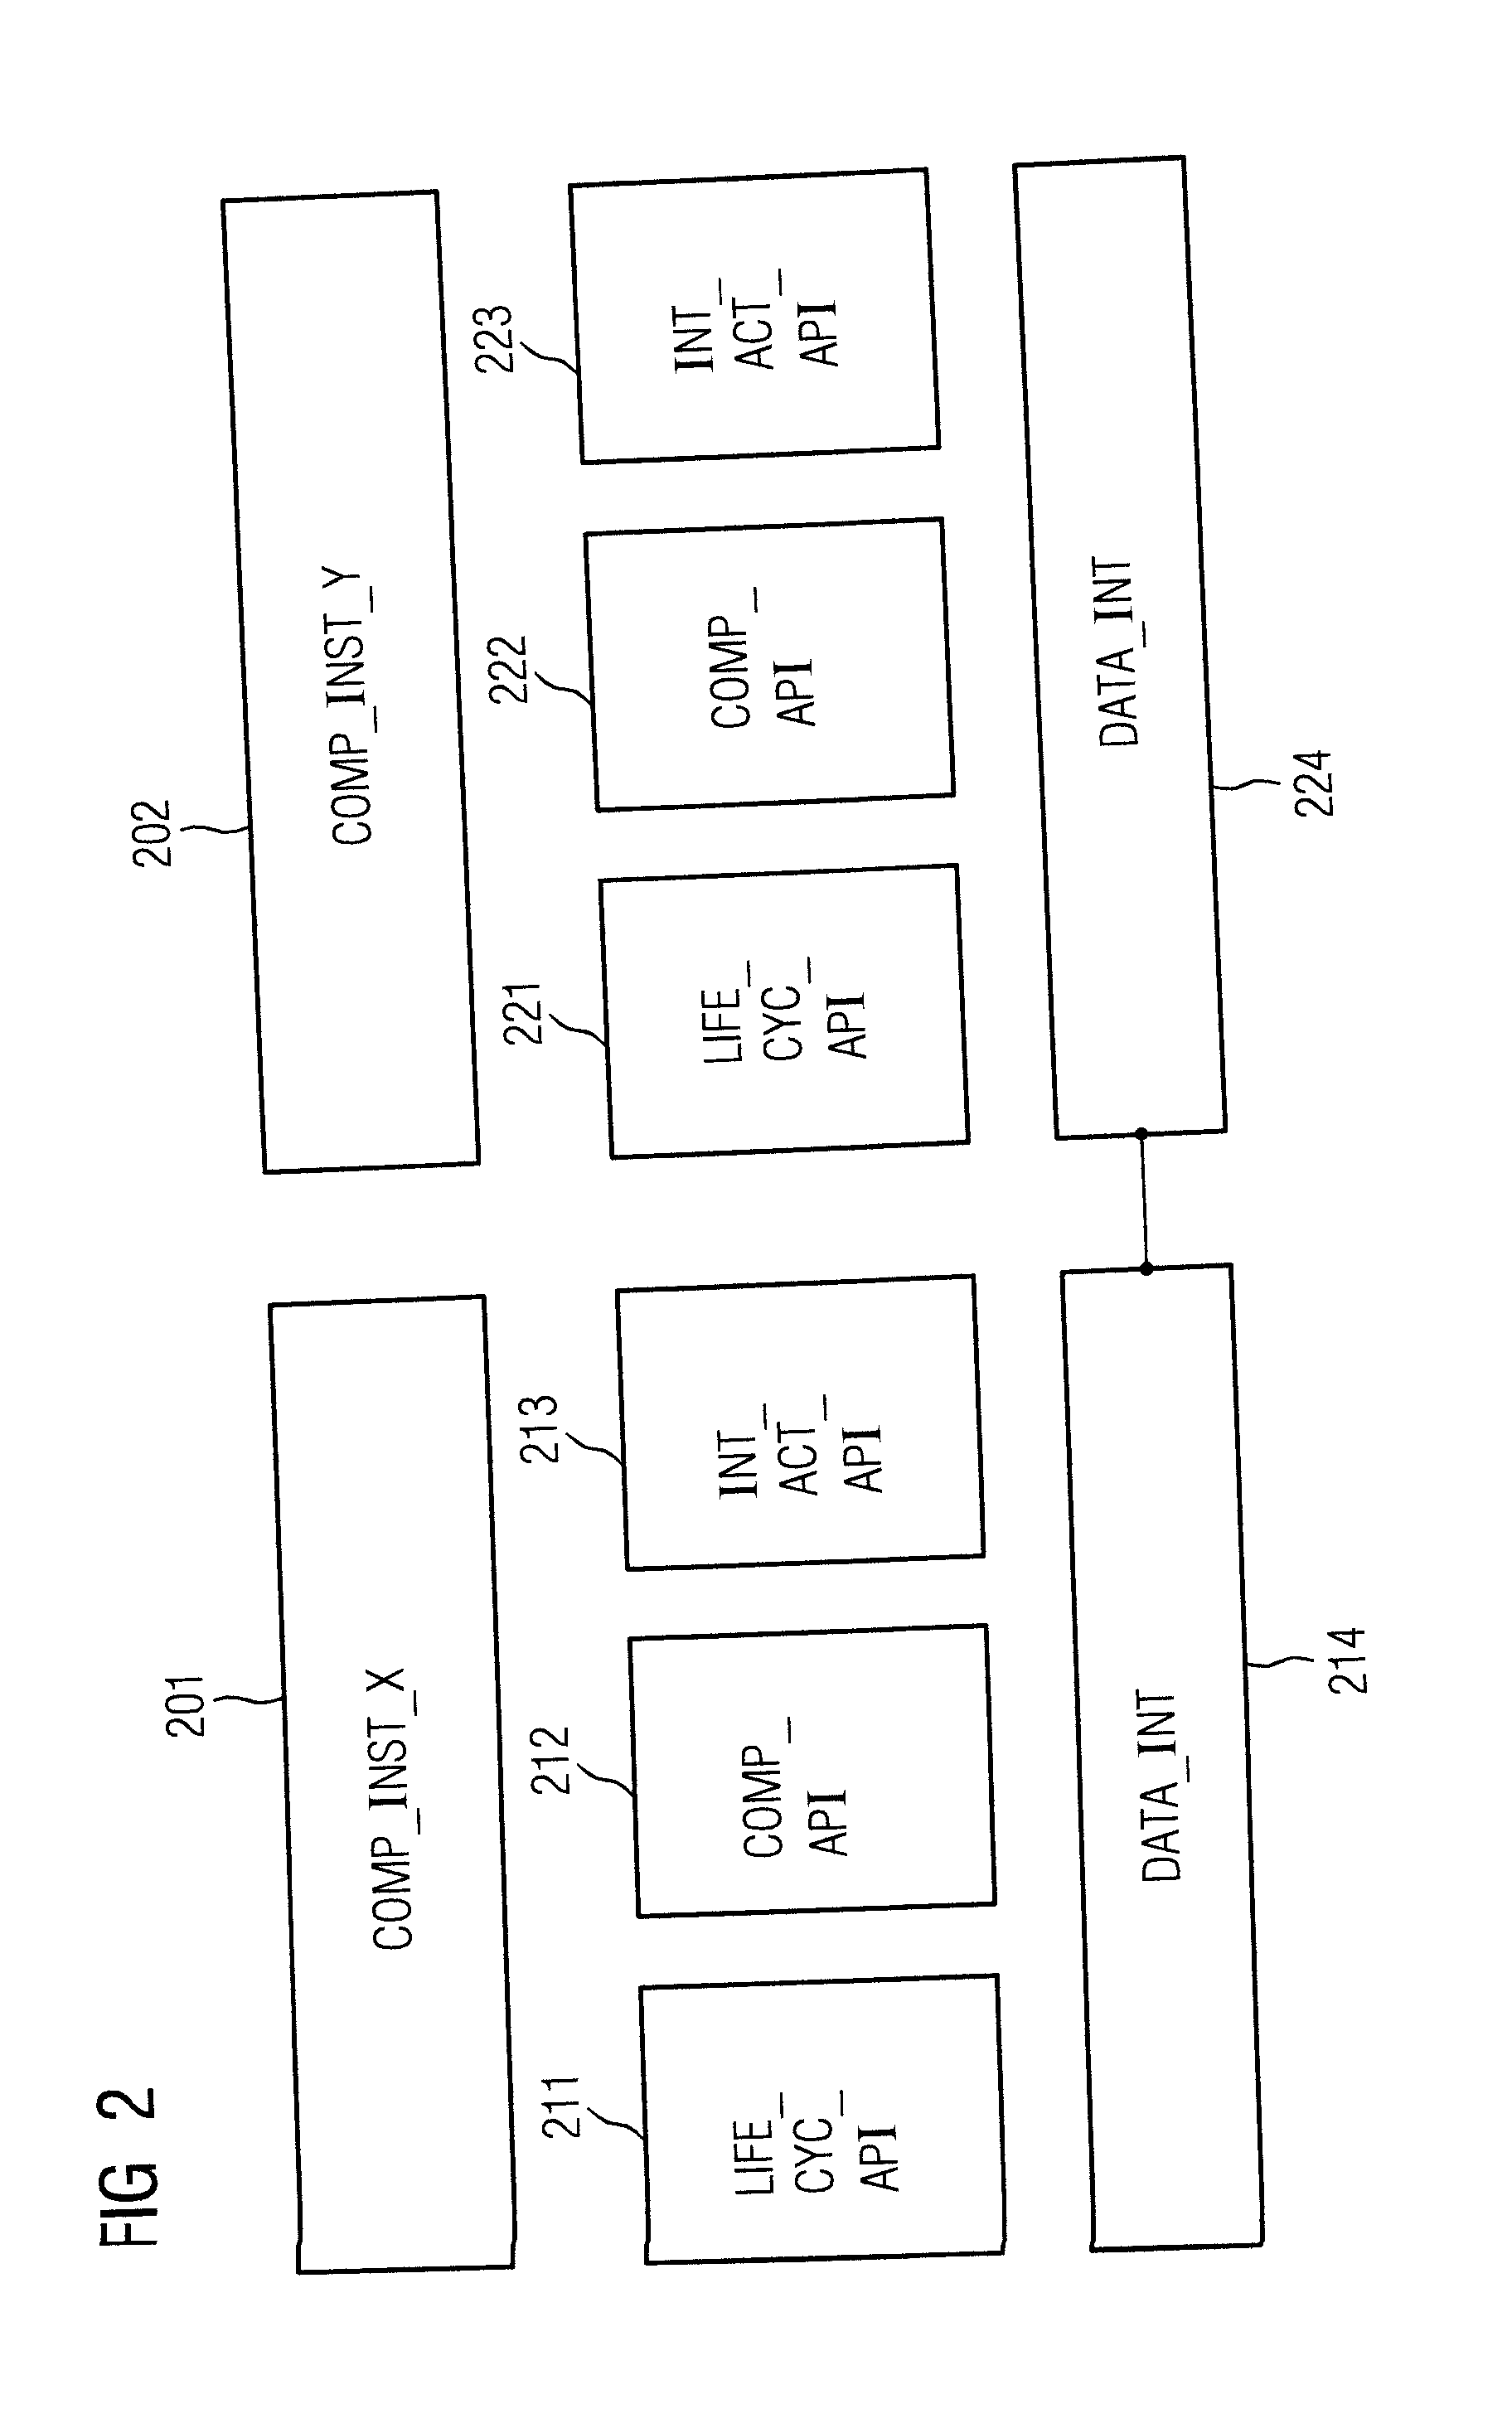 Method for providing functions within an industrial automation system, and industrial automation system